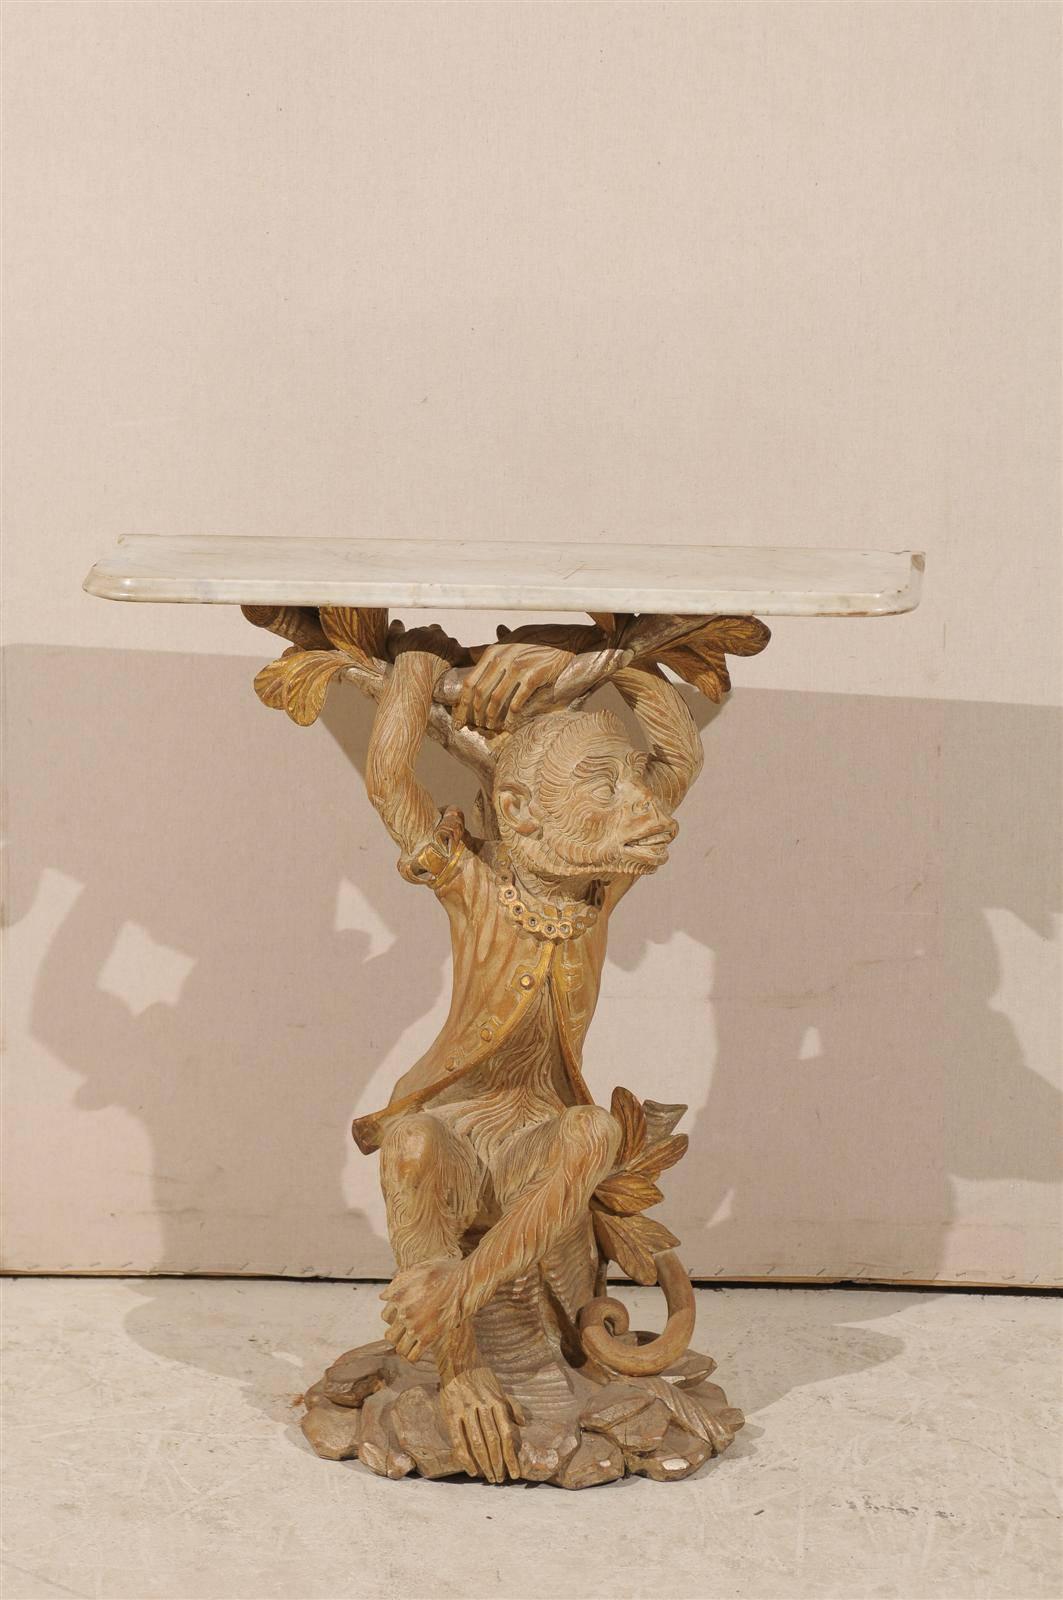 An Italian Console Table with Wooden Carved Monkey Base (The Monkey is Dressed and Accessorized) with Gilded Accents and Marble Top from the 20th Century. 